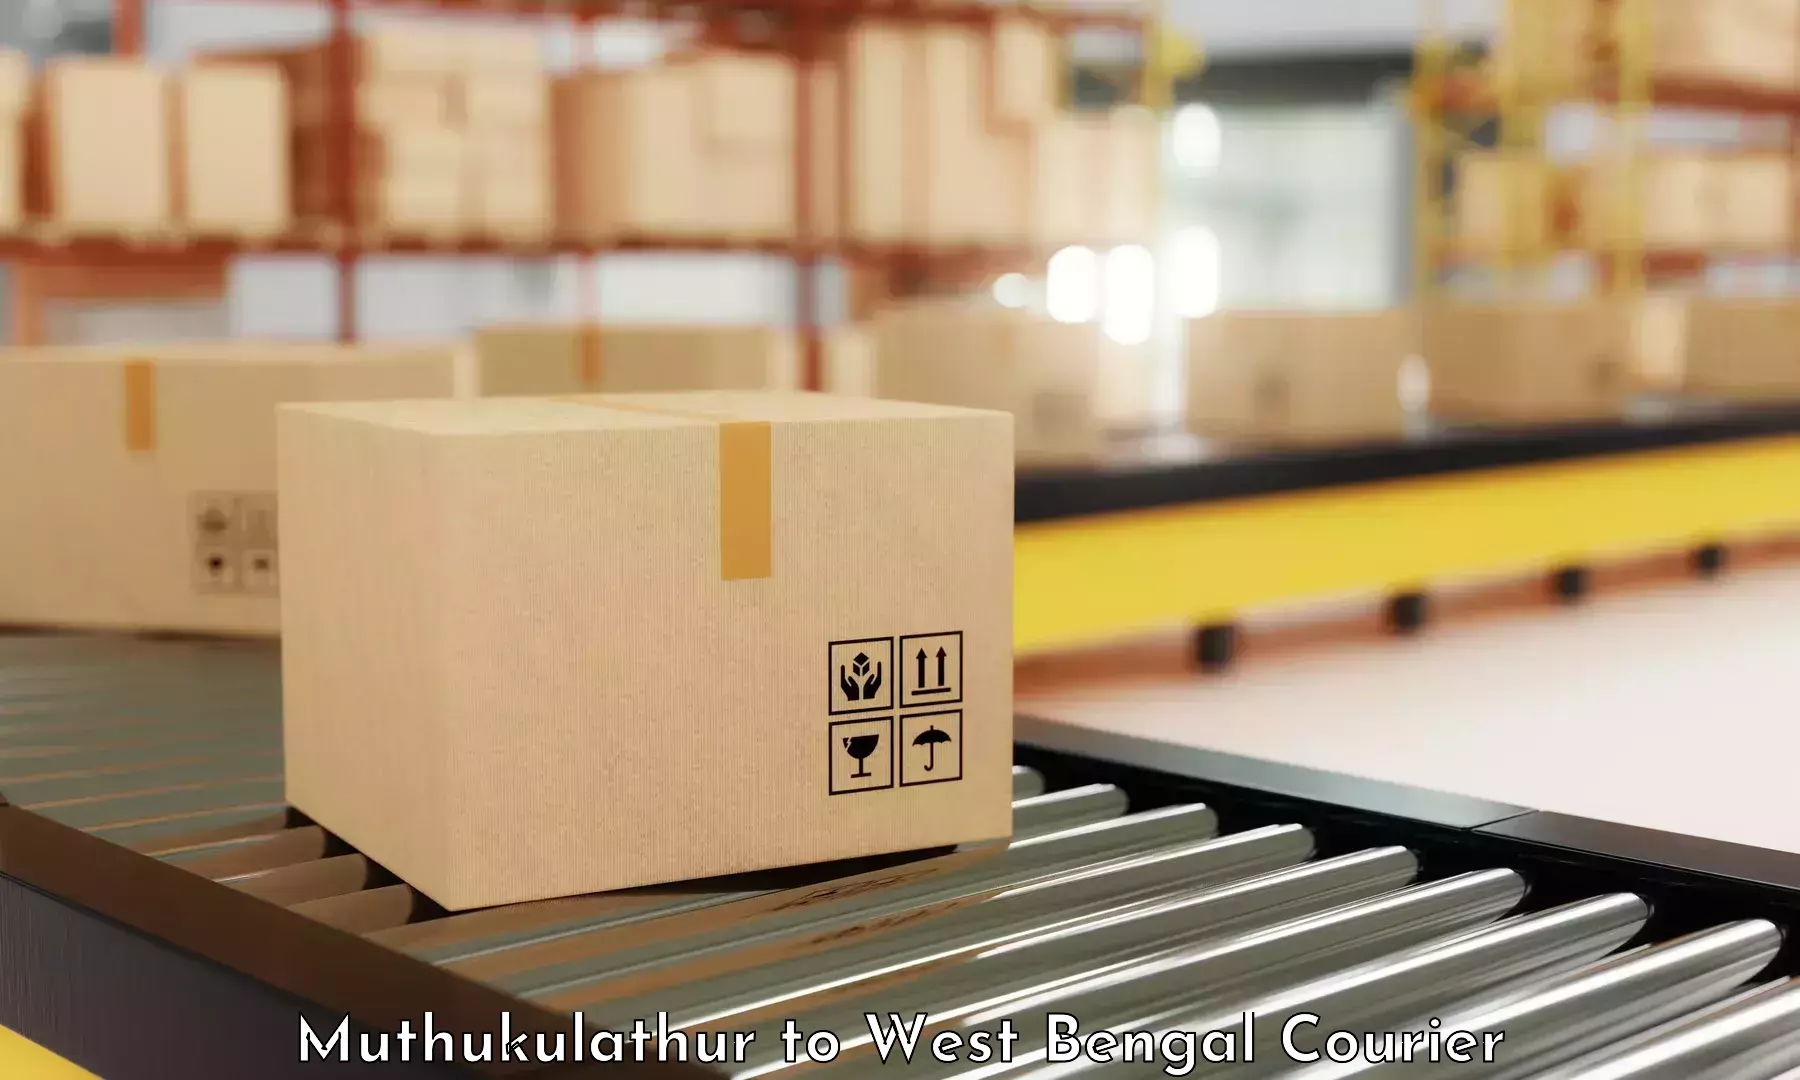 Efficient order fulfillment in Muthukulathur to Palasi